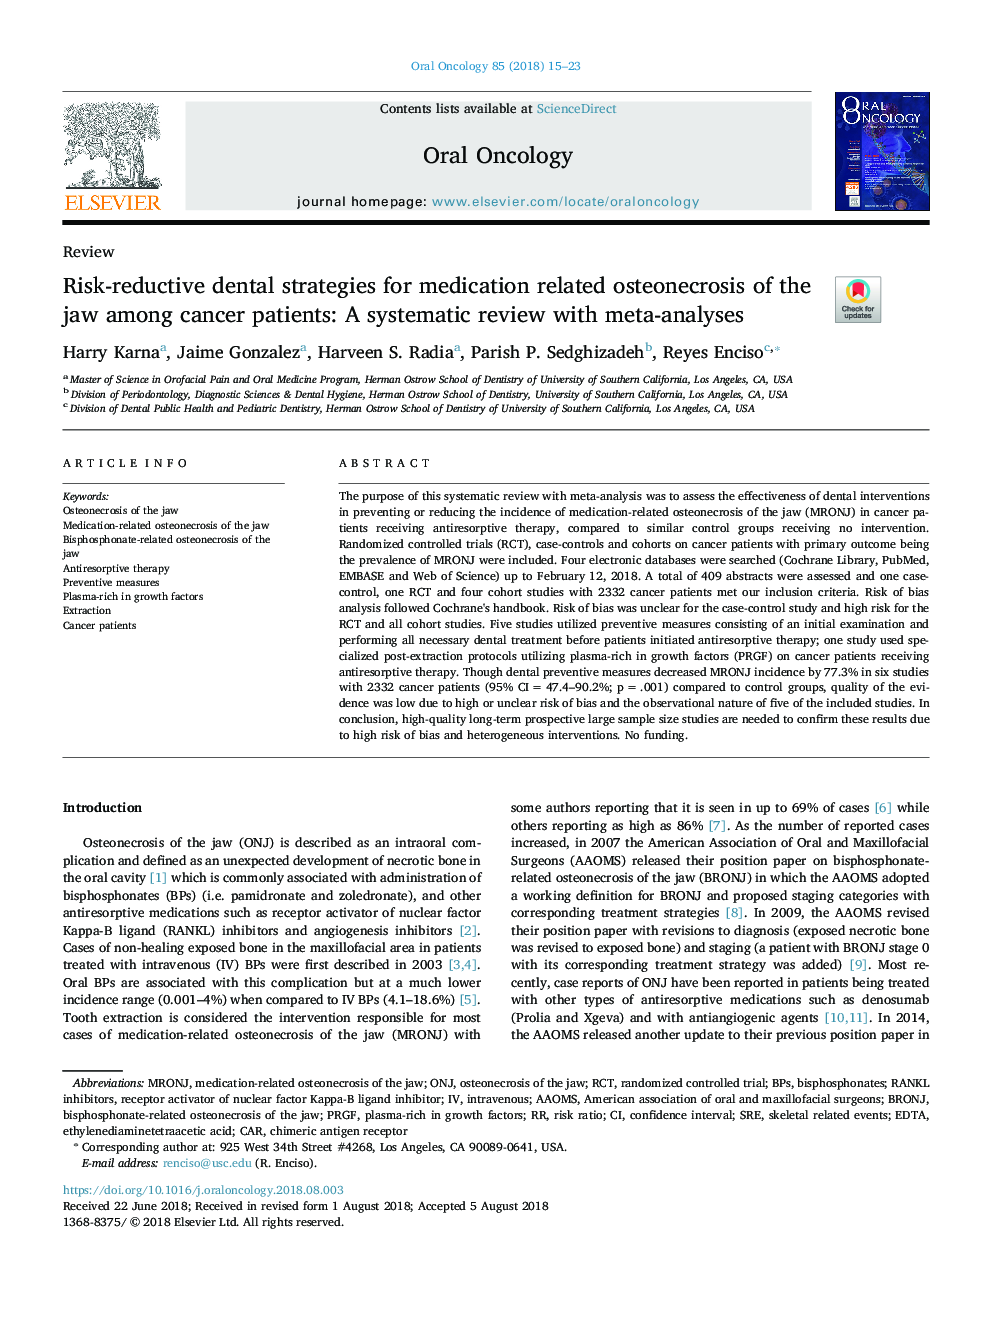 Risk-reductive dental strategies for medication related osteonecrosis of the jaw among cancer patients: A systematic review with meta-analyses